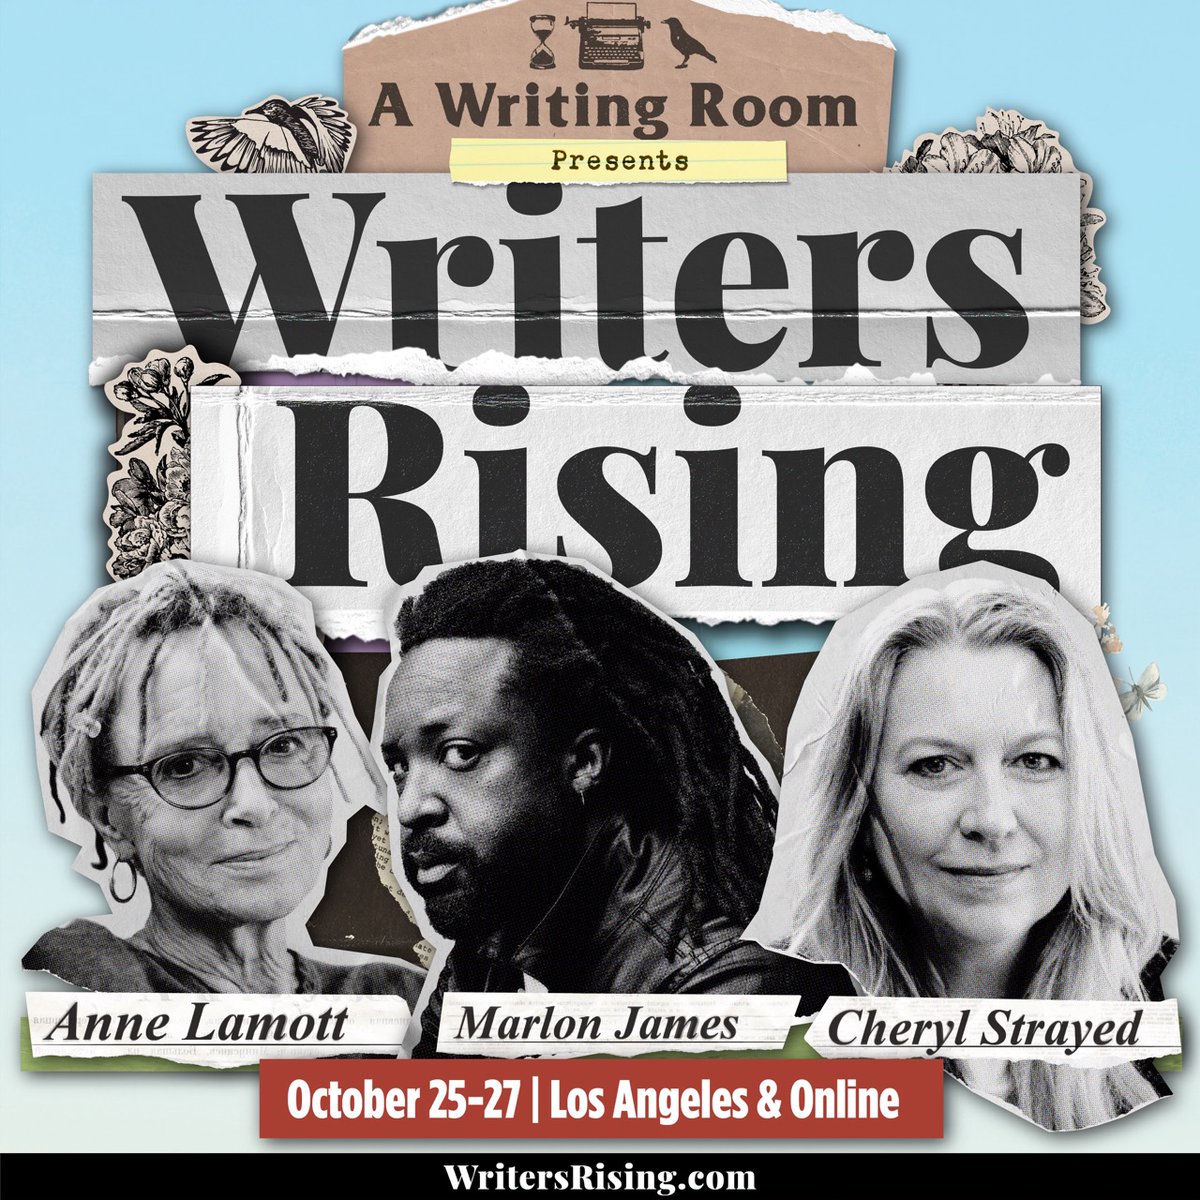 Join the ⭐️Writers Rising⭐️ retreat in Hollywood (or via livestream) 10/25-10/27 & you’ll hear from an amazing lineup of instructors, including Anne Lamott, Cheryl Strayed & more. Want to share your voice & reach your creative potential? Learn more here: buff.ly/3ytCFAB